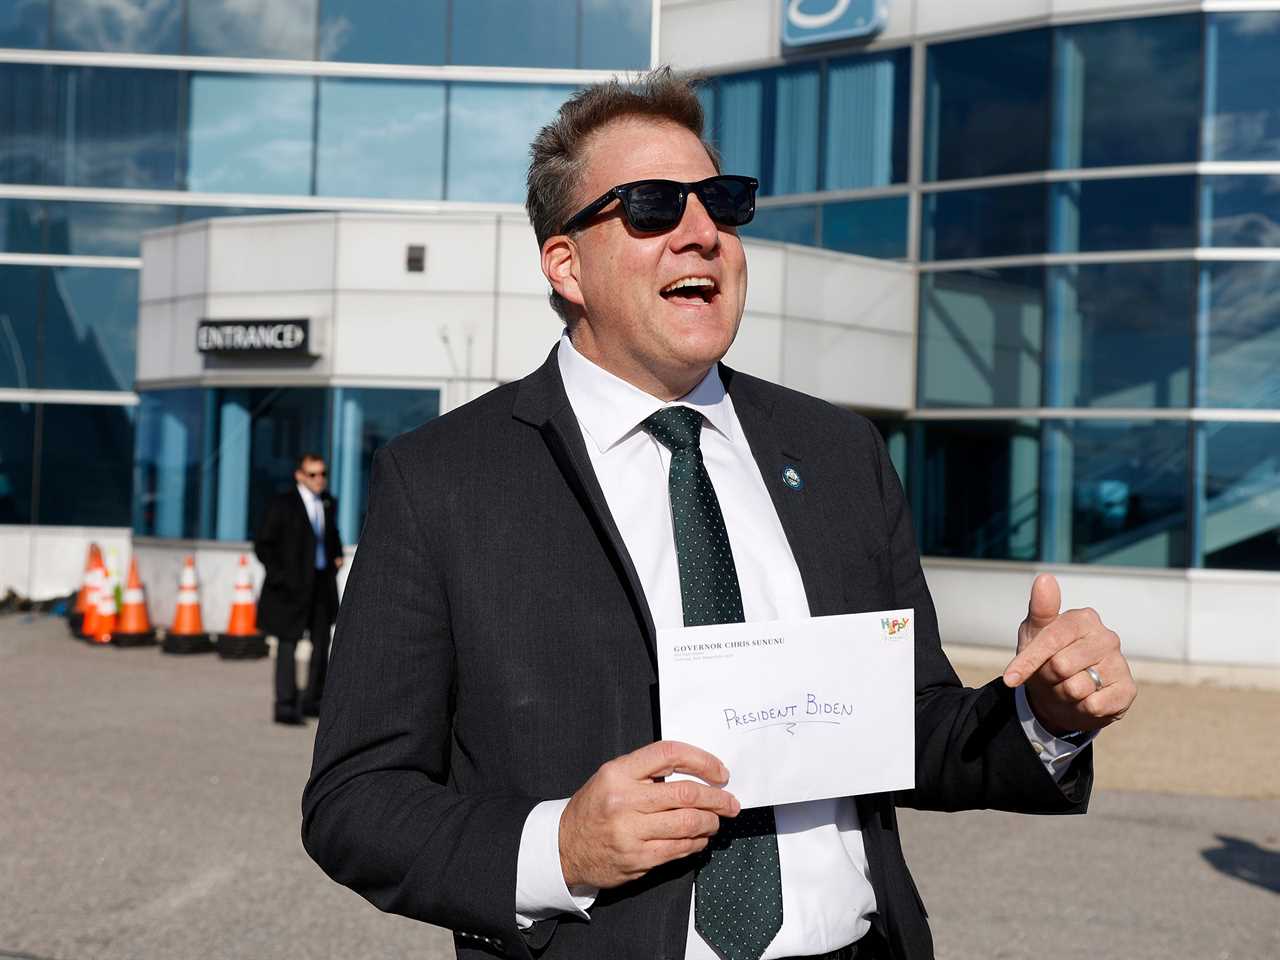 New Hampshire Republican Gov. Chris Sununu speaks to the media about a hand written birthday card for President Joe Biden as he awaited Biden's arrival on Air Force One Tuesday, Nov. 16, 2021, in Manchester, N.H.